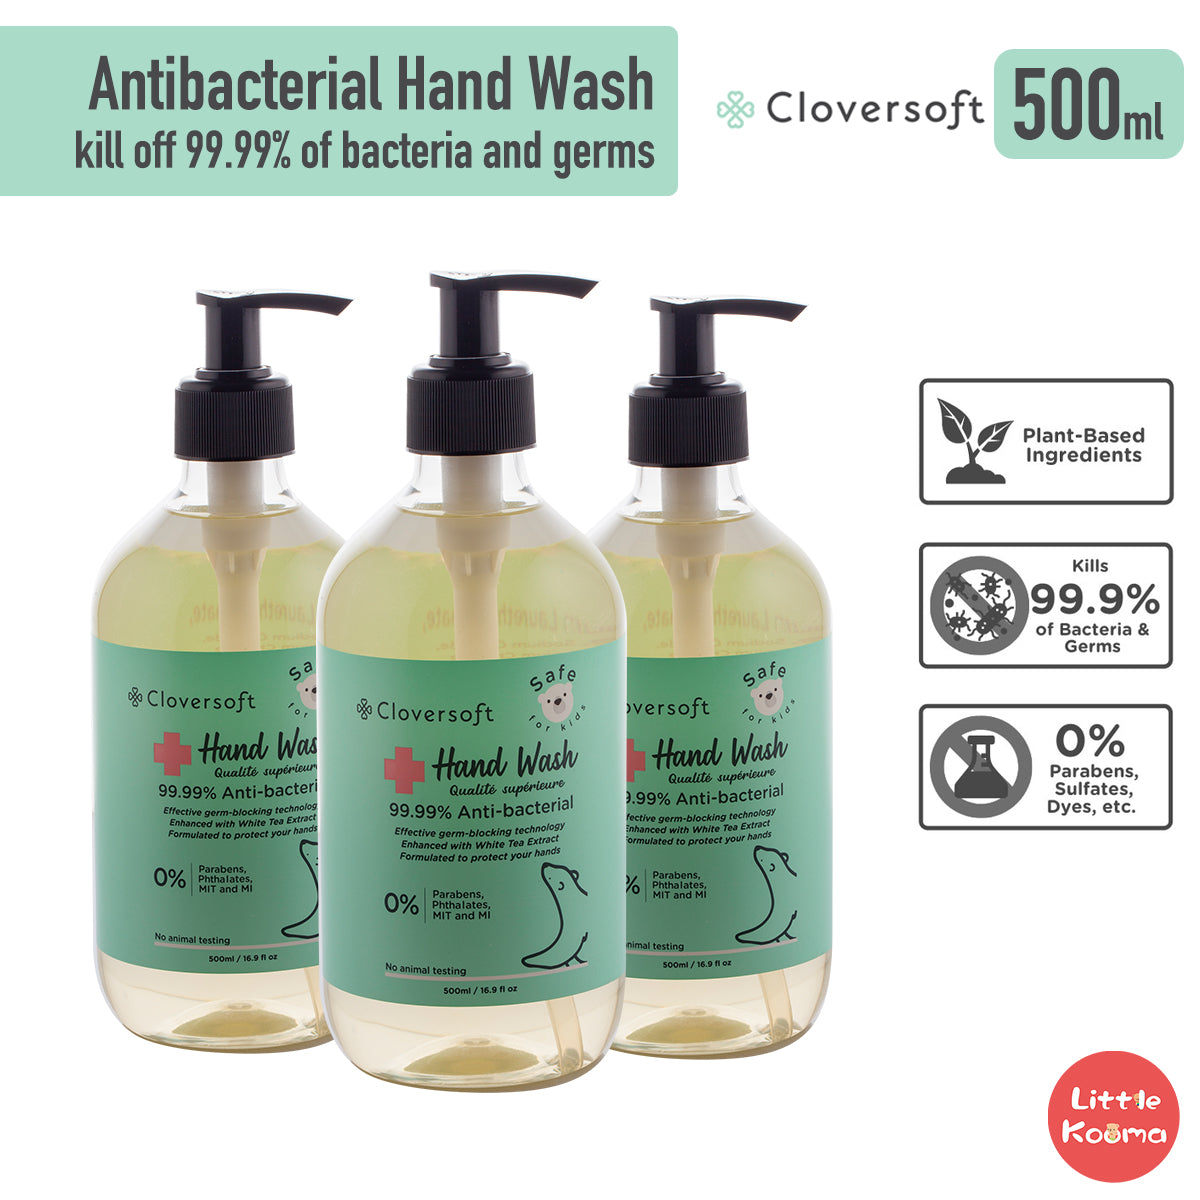 Cloversoft Antibacterial Hand Wash Efficacy Tested - 500ml per Bottle - Little Kooma